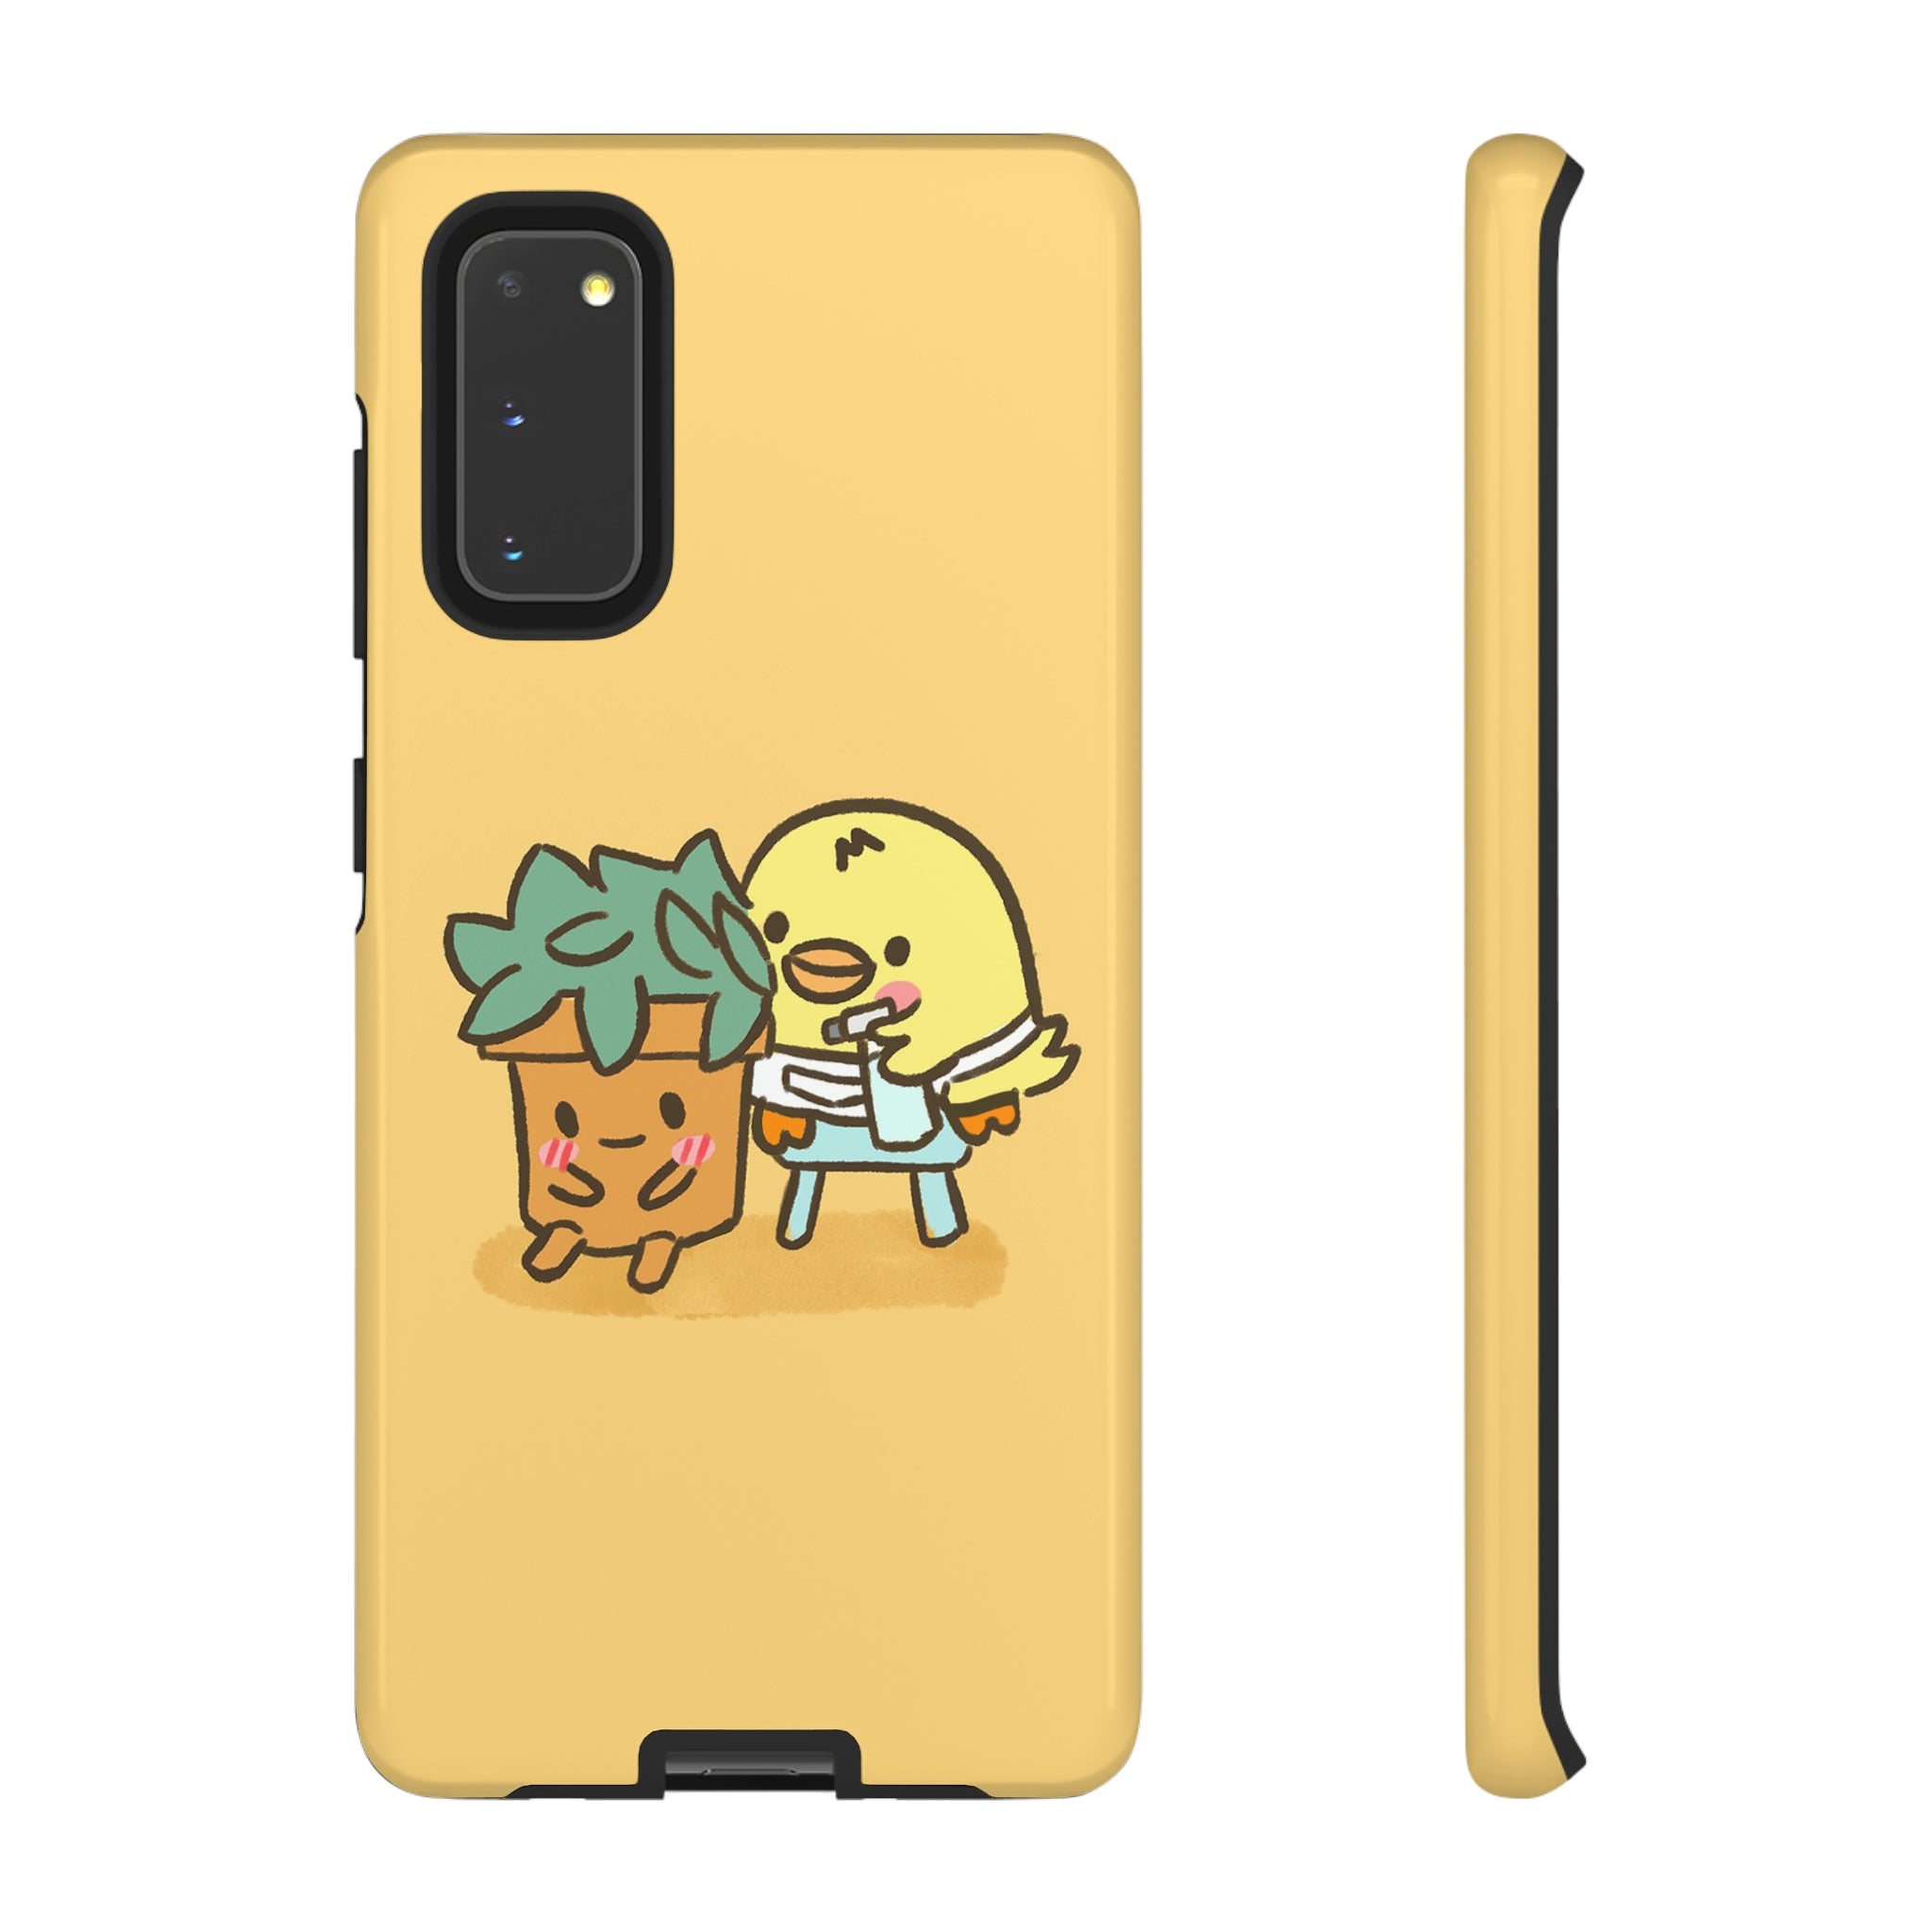 Taking Care of Each Other Samsung/Google Phone Case